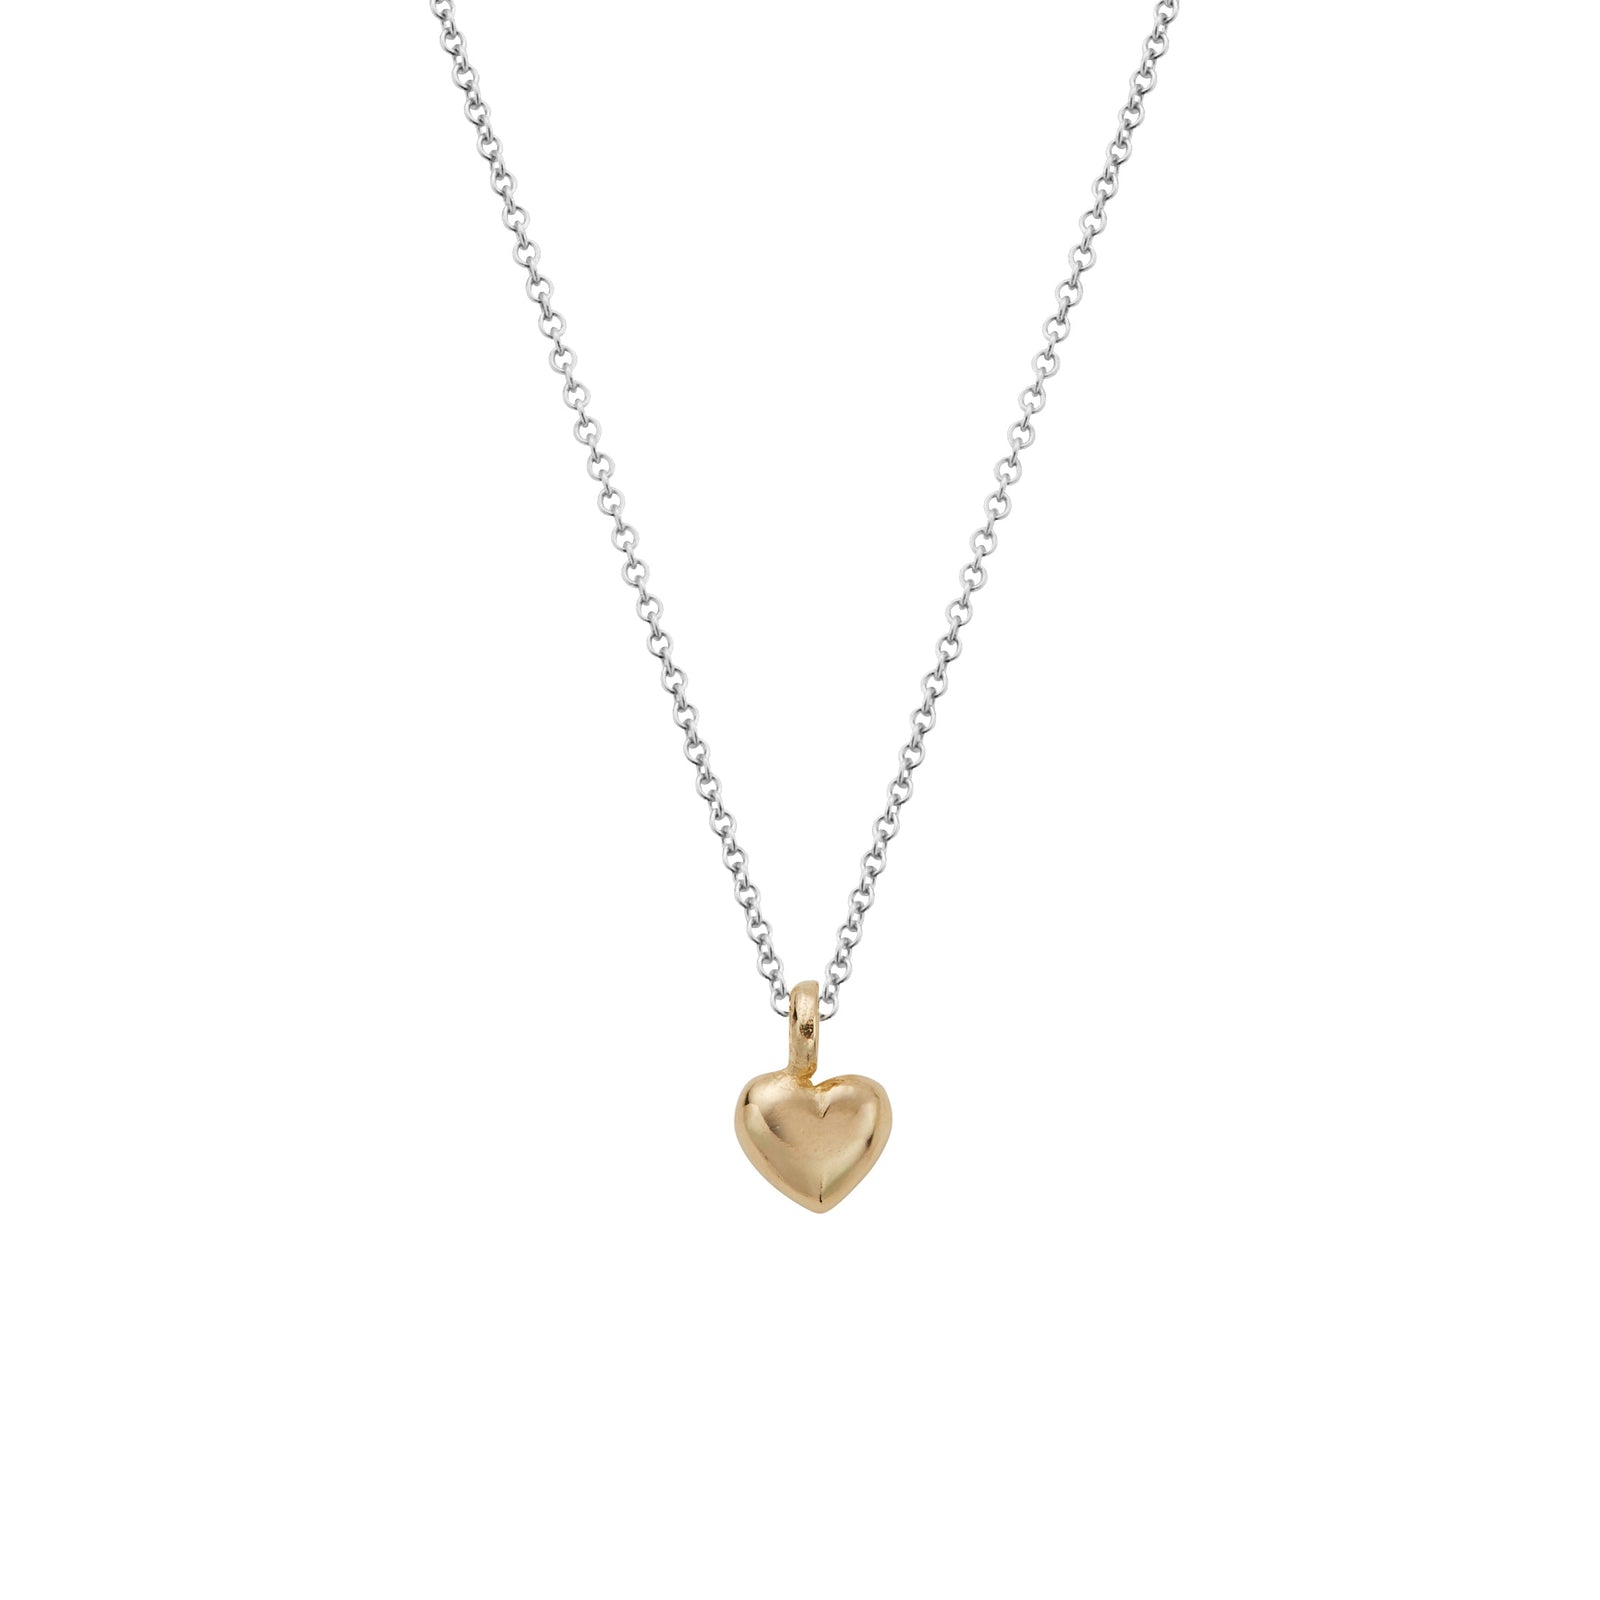 Silver & Gold Think of Me Heart Necklaces